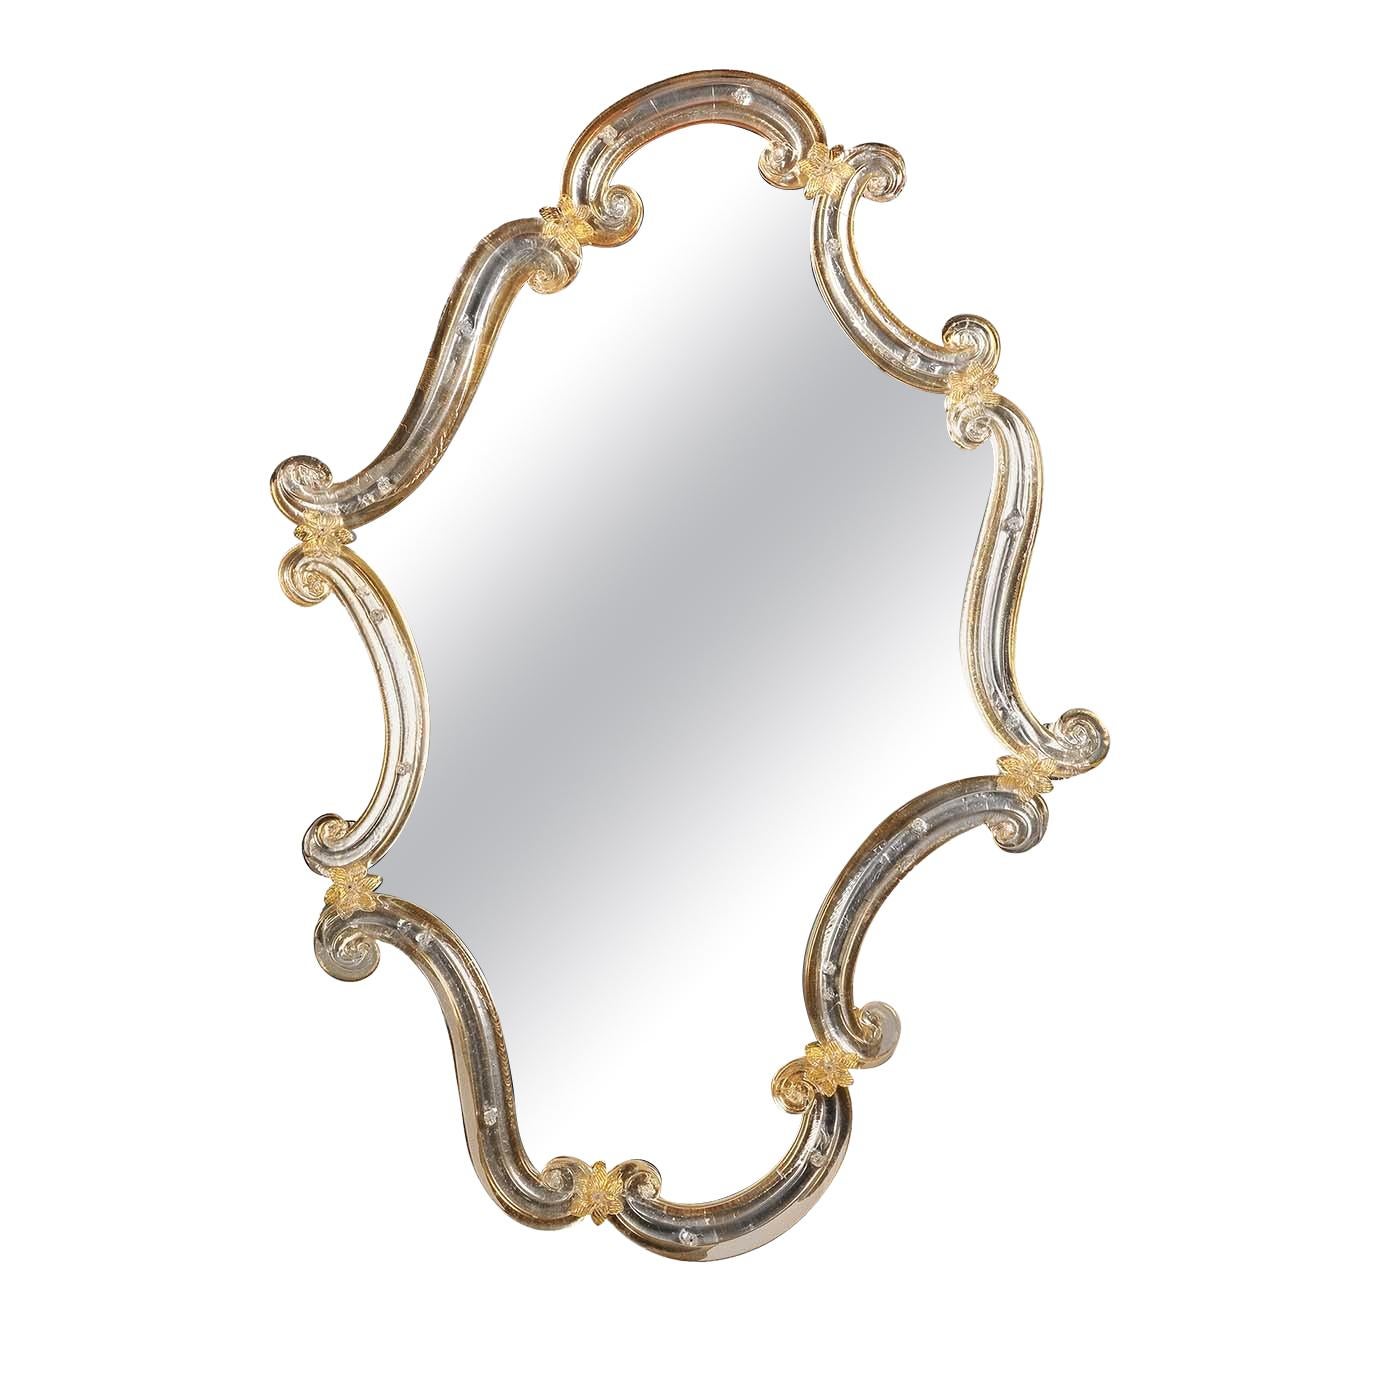 Storti Co L'Oro Vertical Mirror by Ongaro & Fuga For Sale